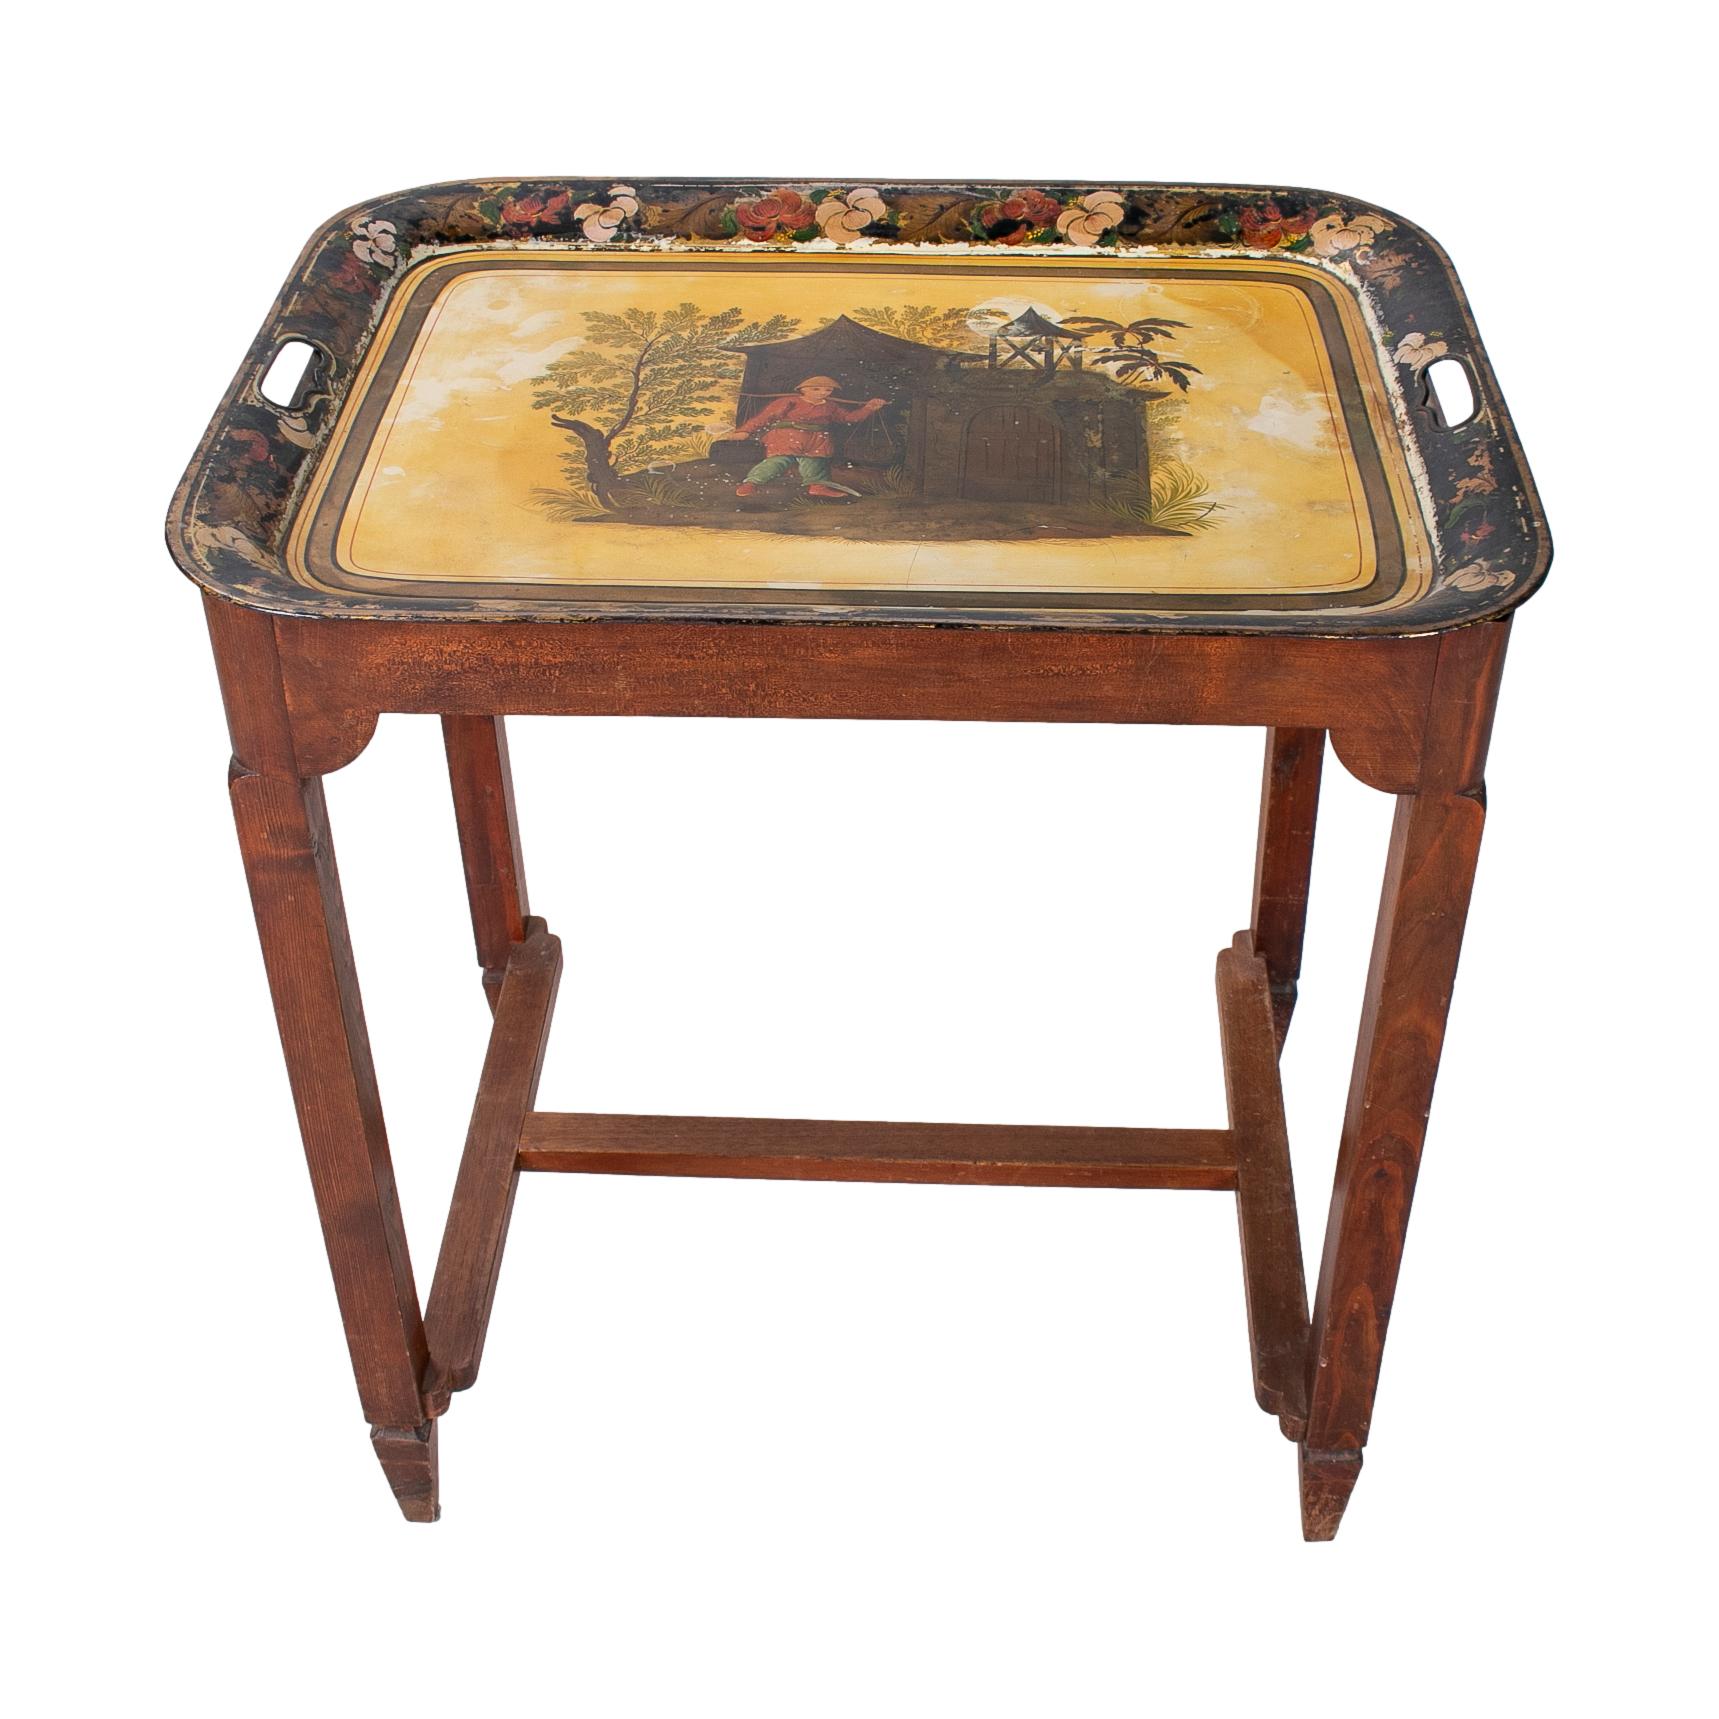 1920s French Chinoiserie Metallic Tray w/ Wooden Stand Table In Good Condition For Sale In Marbella, ES